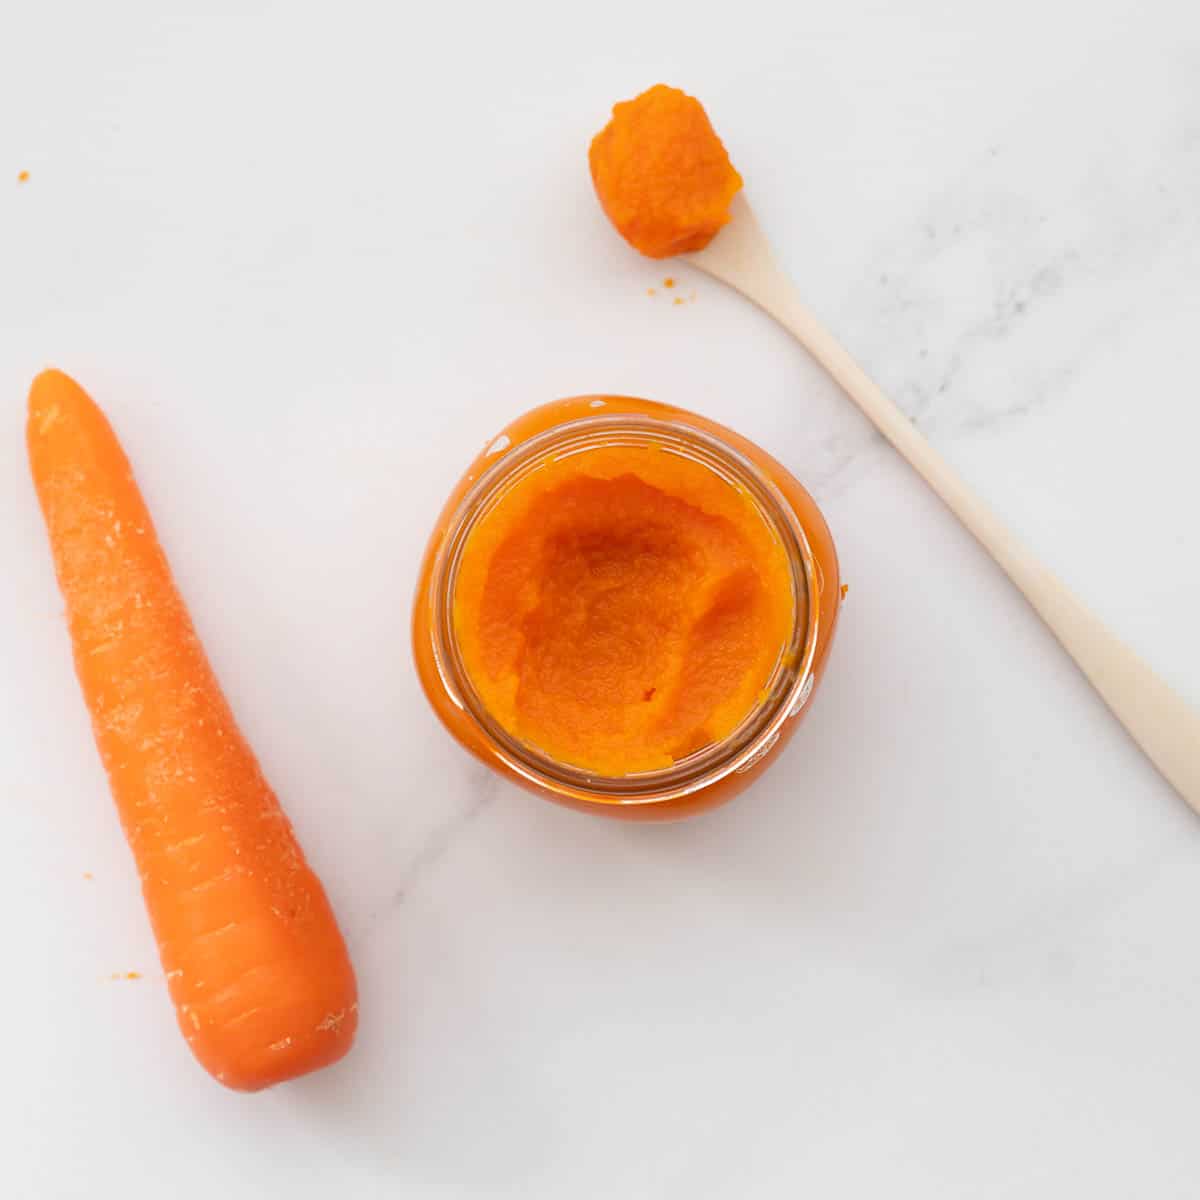 A jar of orange carrot puree on a bench next to a carrot  and a bamboo spoon loaded with the puree.